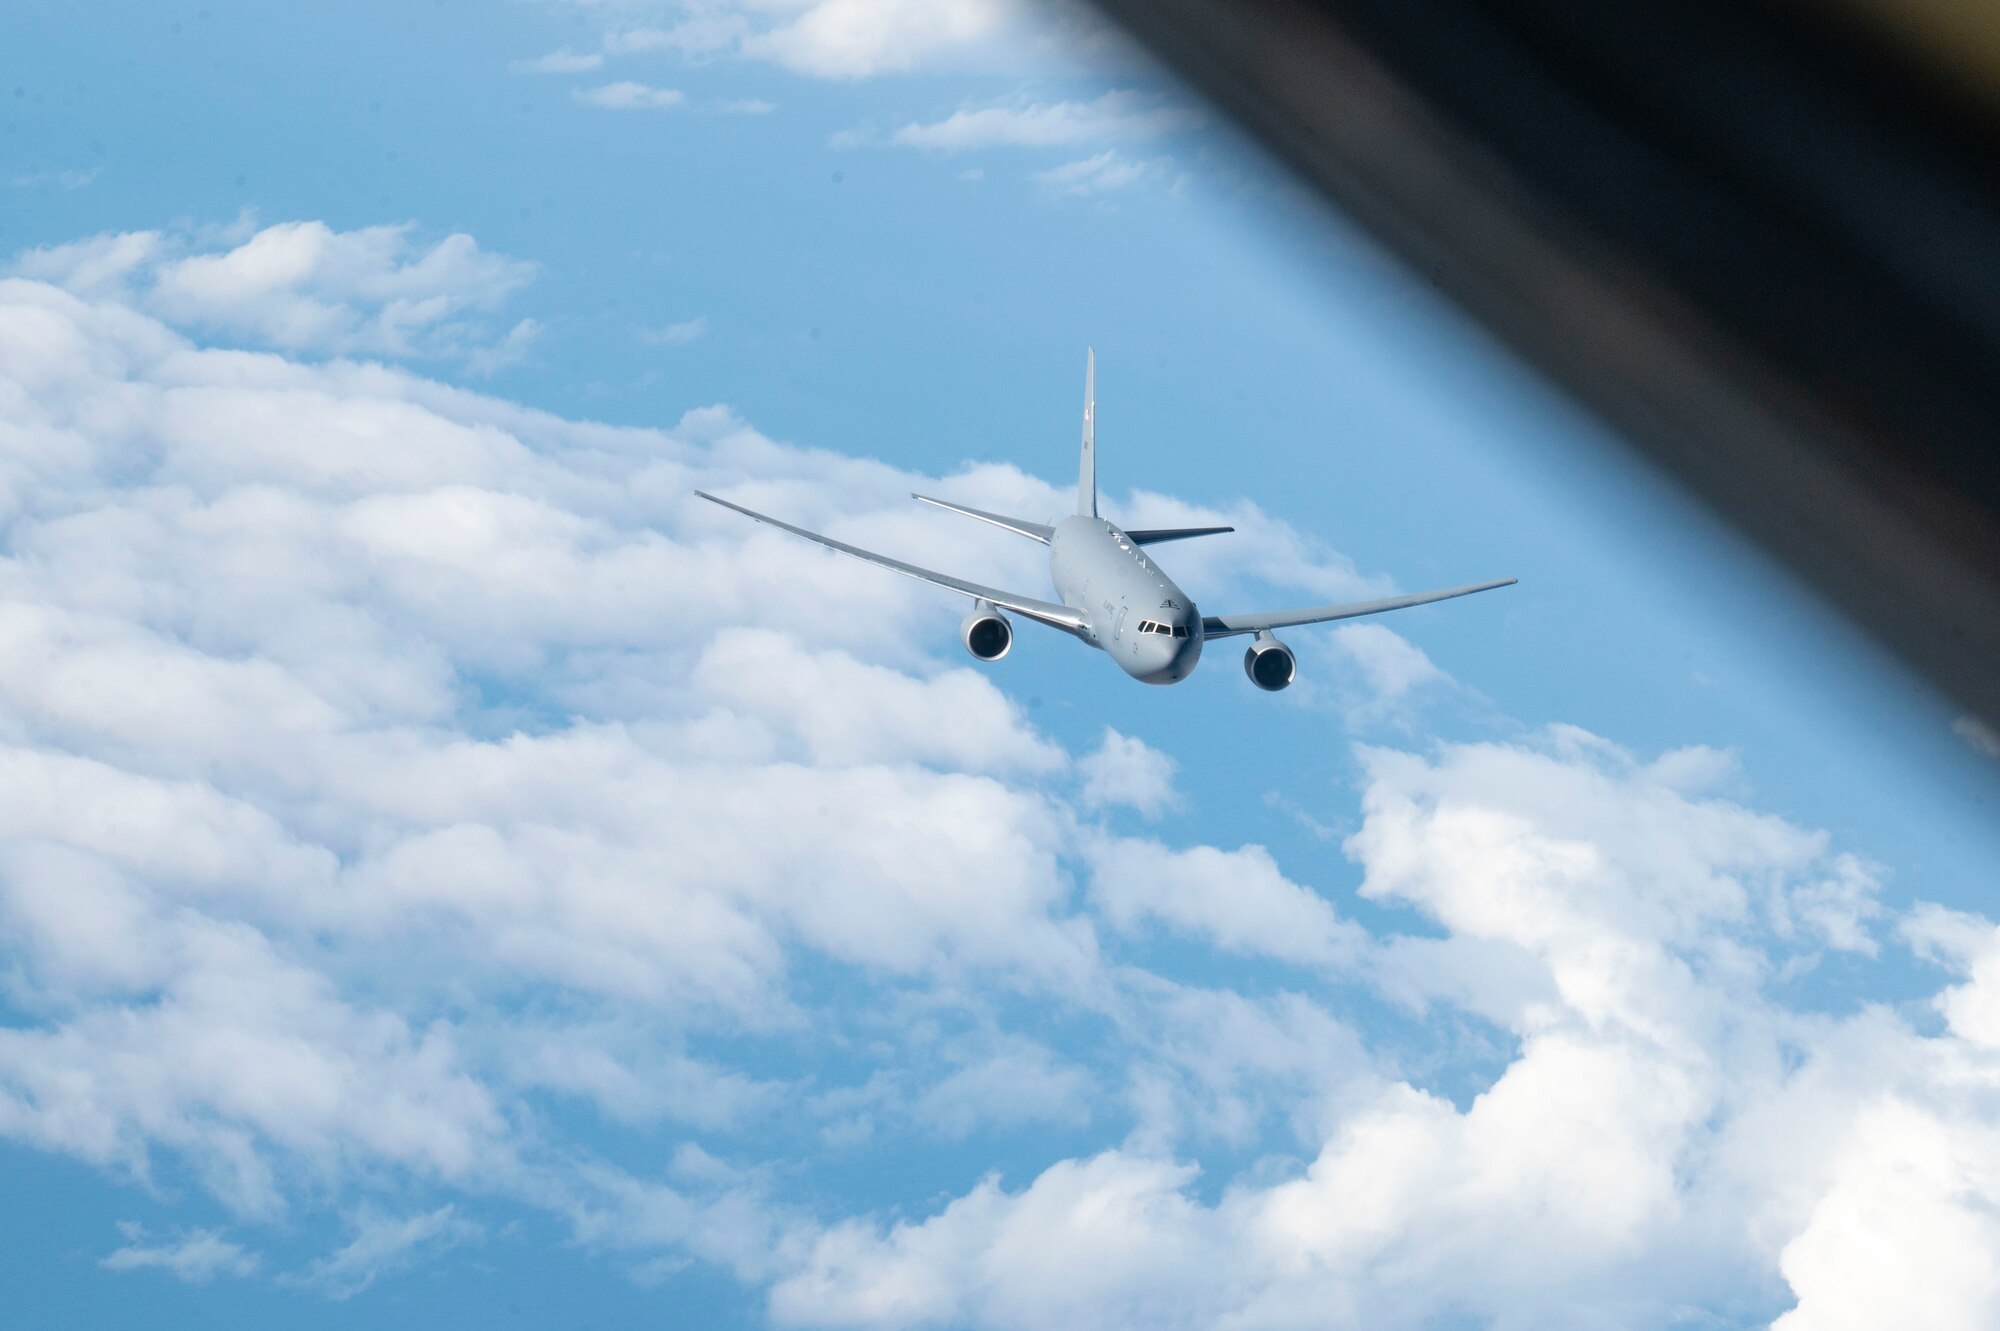 A U.S. Air Force KC-135 Stratotanker prepares to refuel a KC-46 Pegasus during Mobility Guardian 23 over the Indo-Pacific region, July 14, 2023. 3,000 personnel directly supported the large-scale mobility exercise, which provided the maneuver of more than 15,000 U.S. and international forces associated with other exercises across the Indo-Pacific held in the same timeframe. (U.S. Air Force photo by Tech. Sgt. Heather Clements)